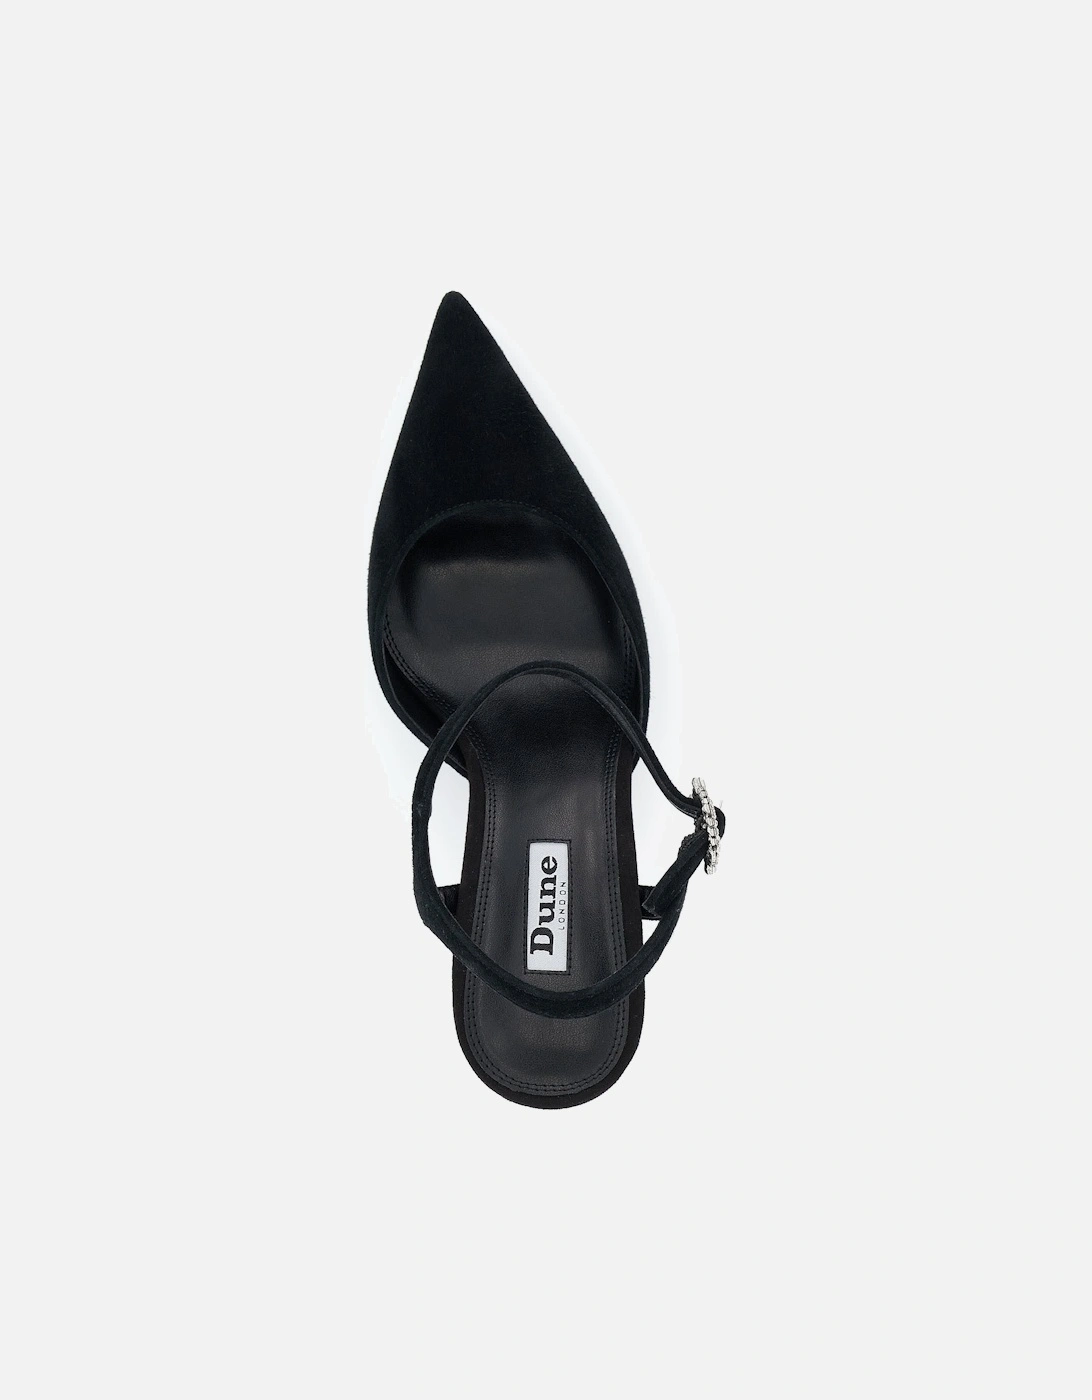 Ladies Channel - Buckle-Detail Heeled Courts